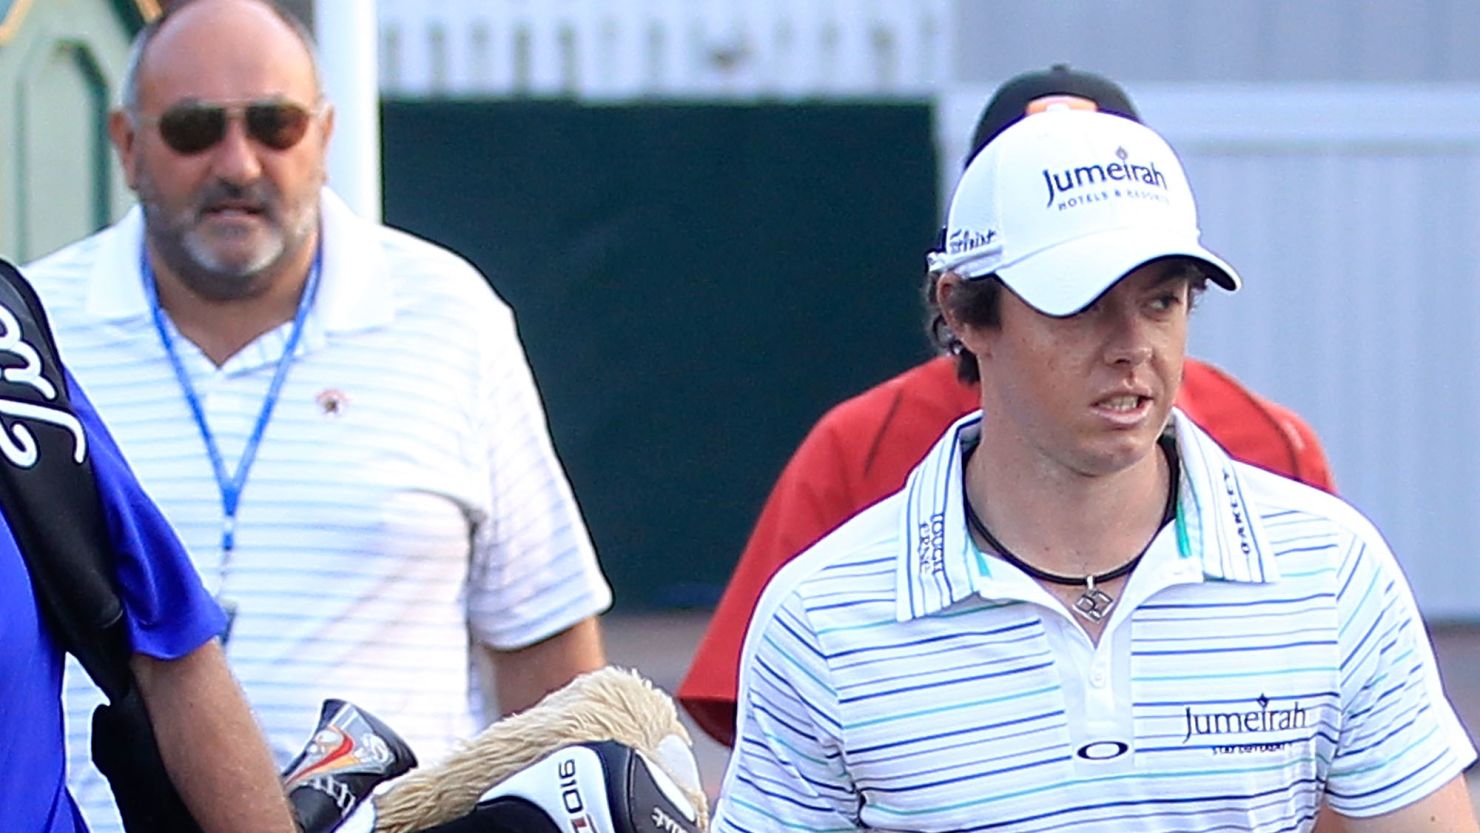 Rory McIlroy and former manager Andrew "Chubby" Chandler at the PGA Championship in August.